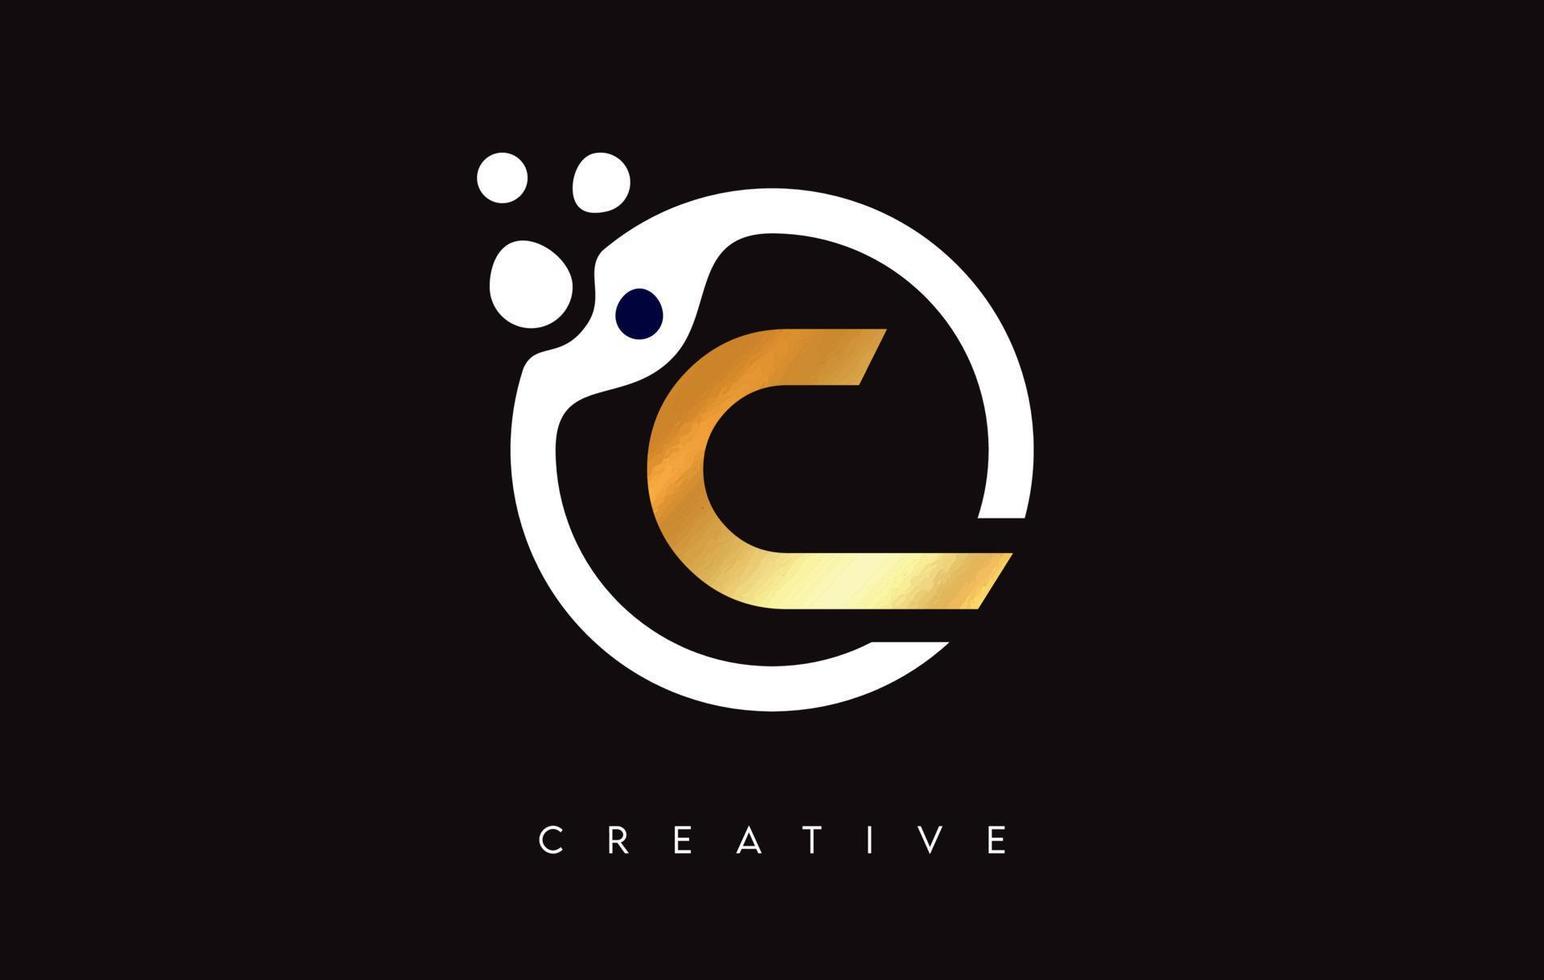 Golden Letter C Logo with Dots and Bubbles inside a Circular Shape in Gold Colors Vector